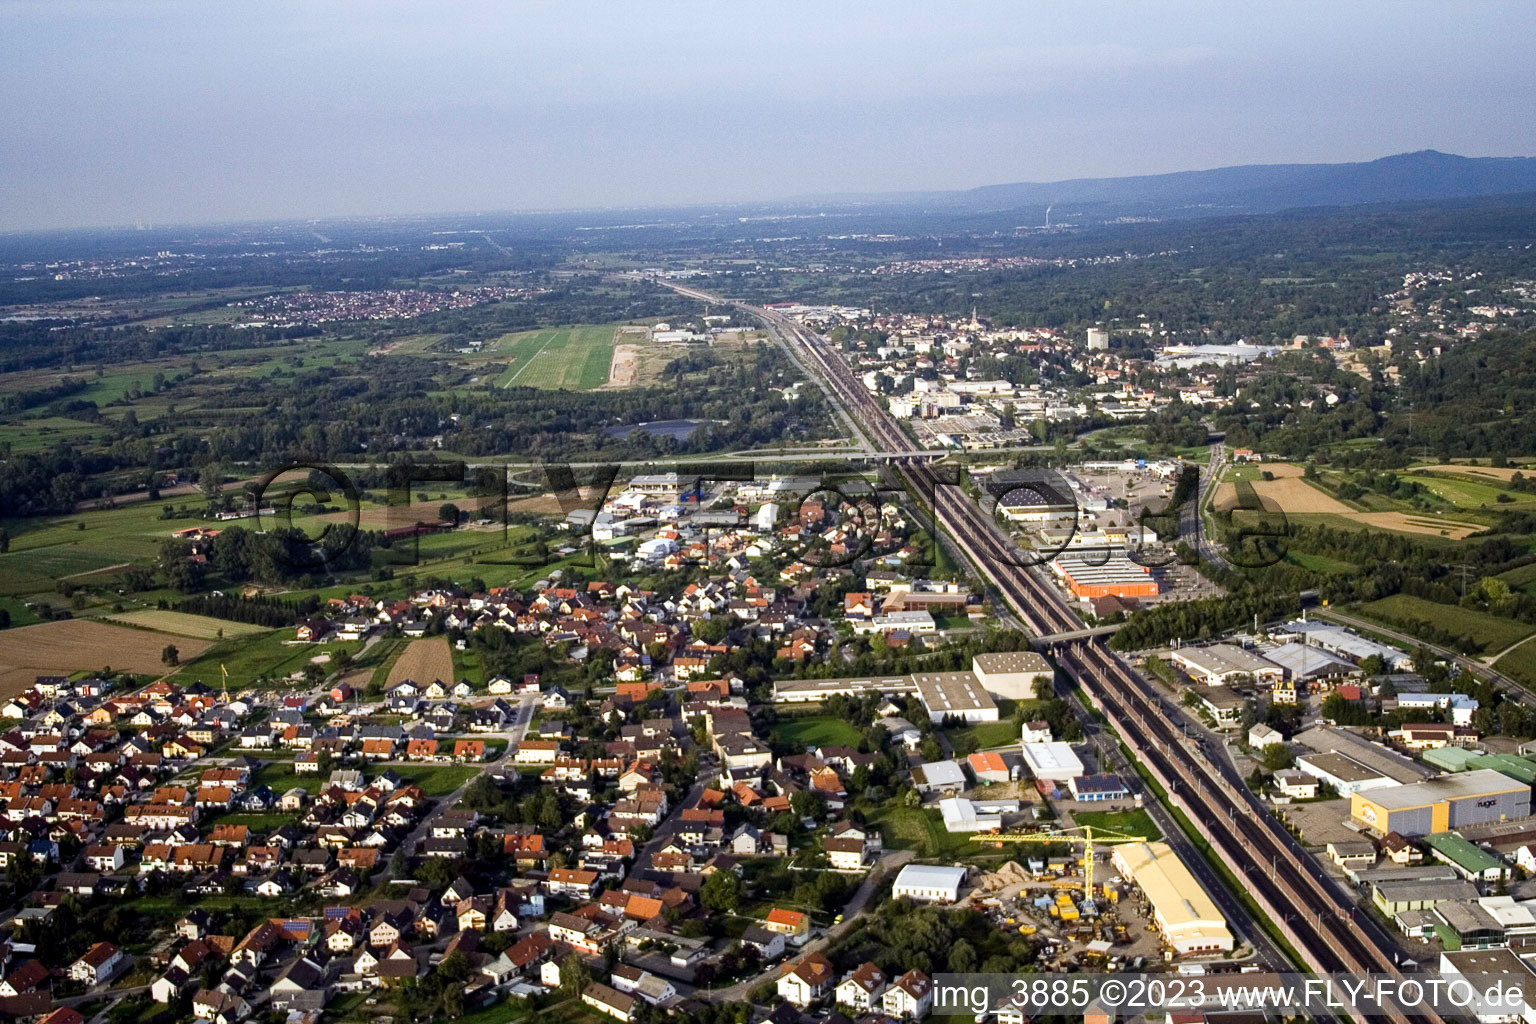 Railway line from the south in the district Kartung in Sinzheim in the state Baden-Wuerttemberg, Germany